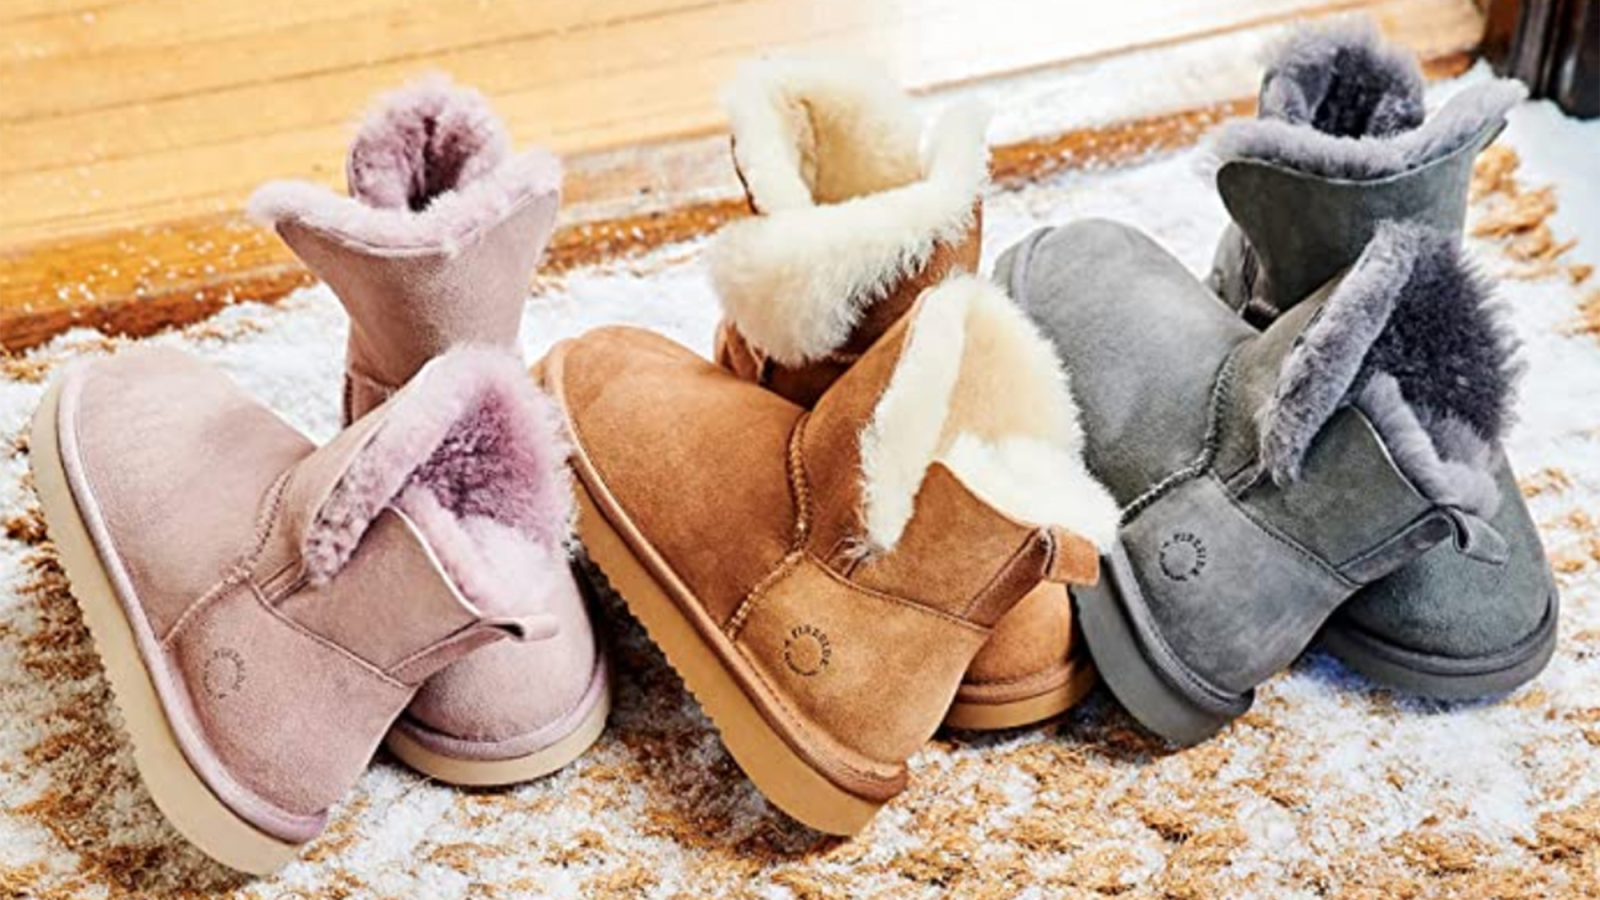 Cozy up this winter with stylish Ugg boots